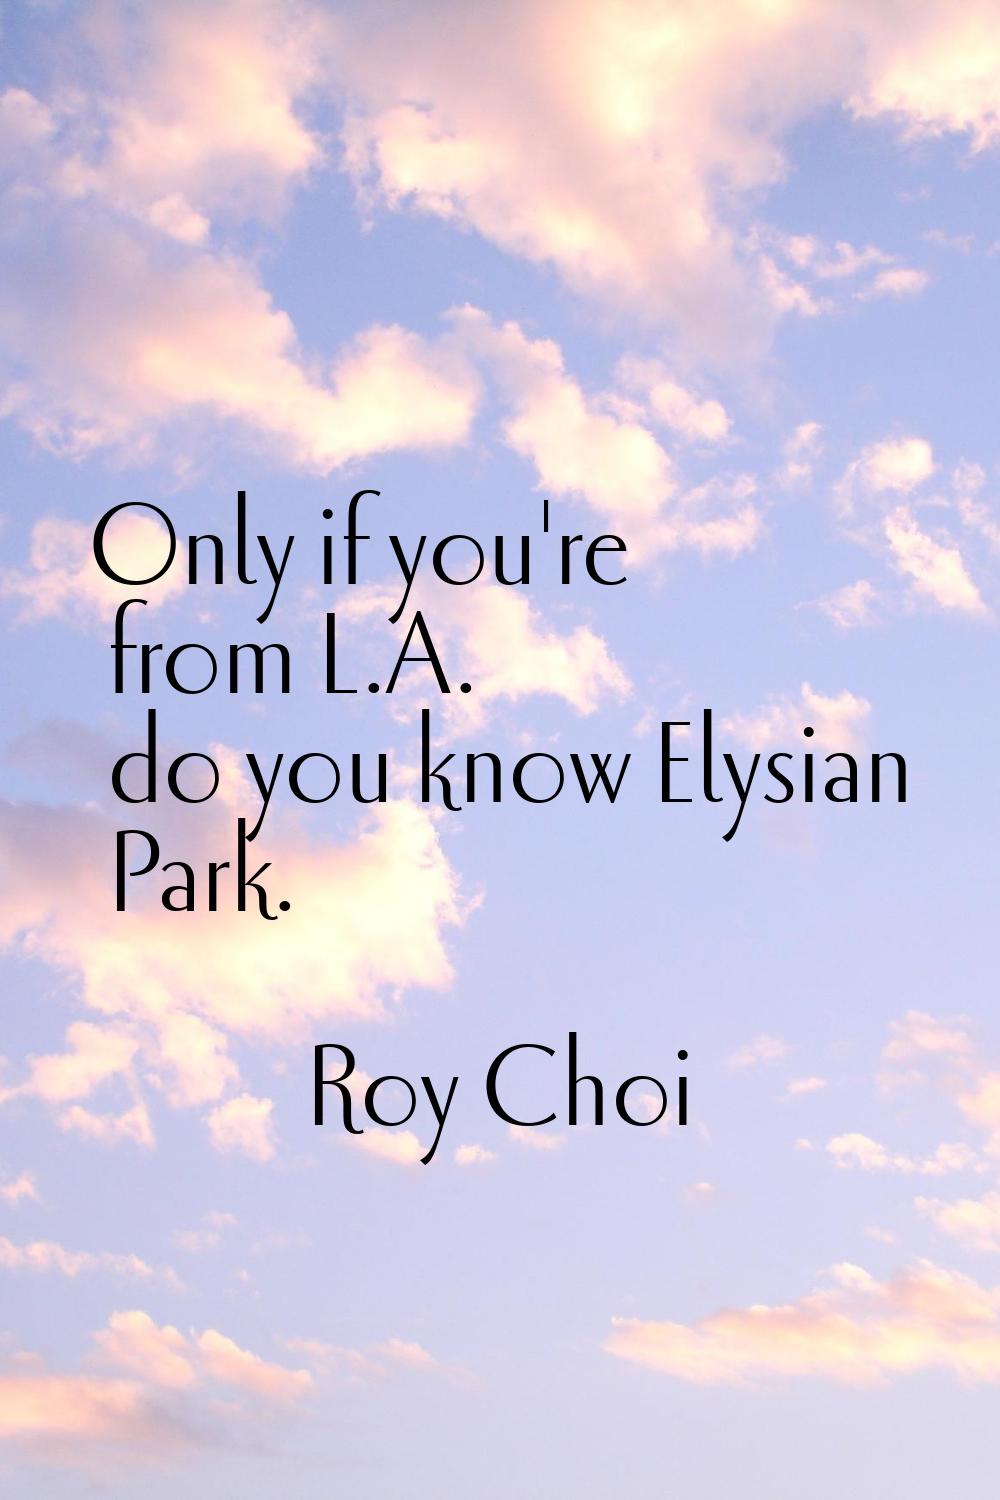 Only if you're from L.A. do you know Elysian Park.